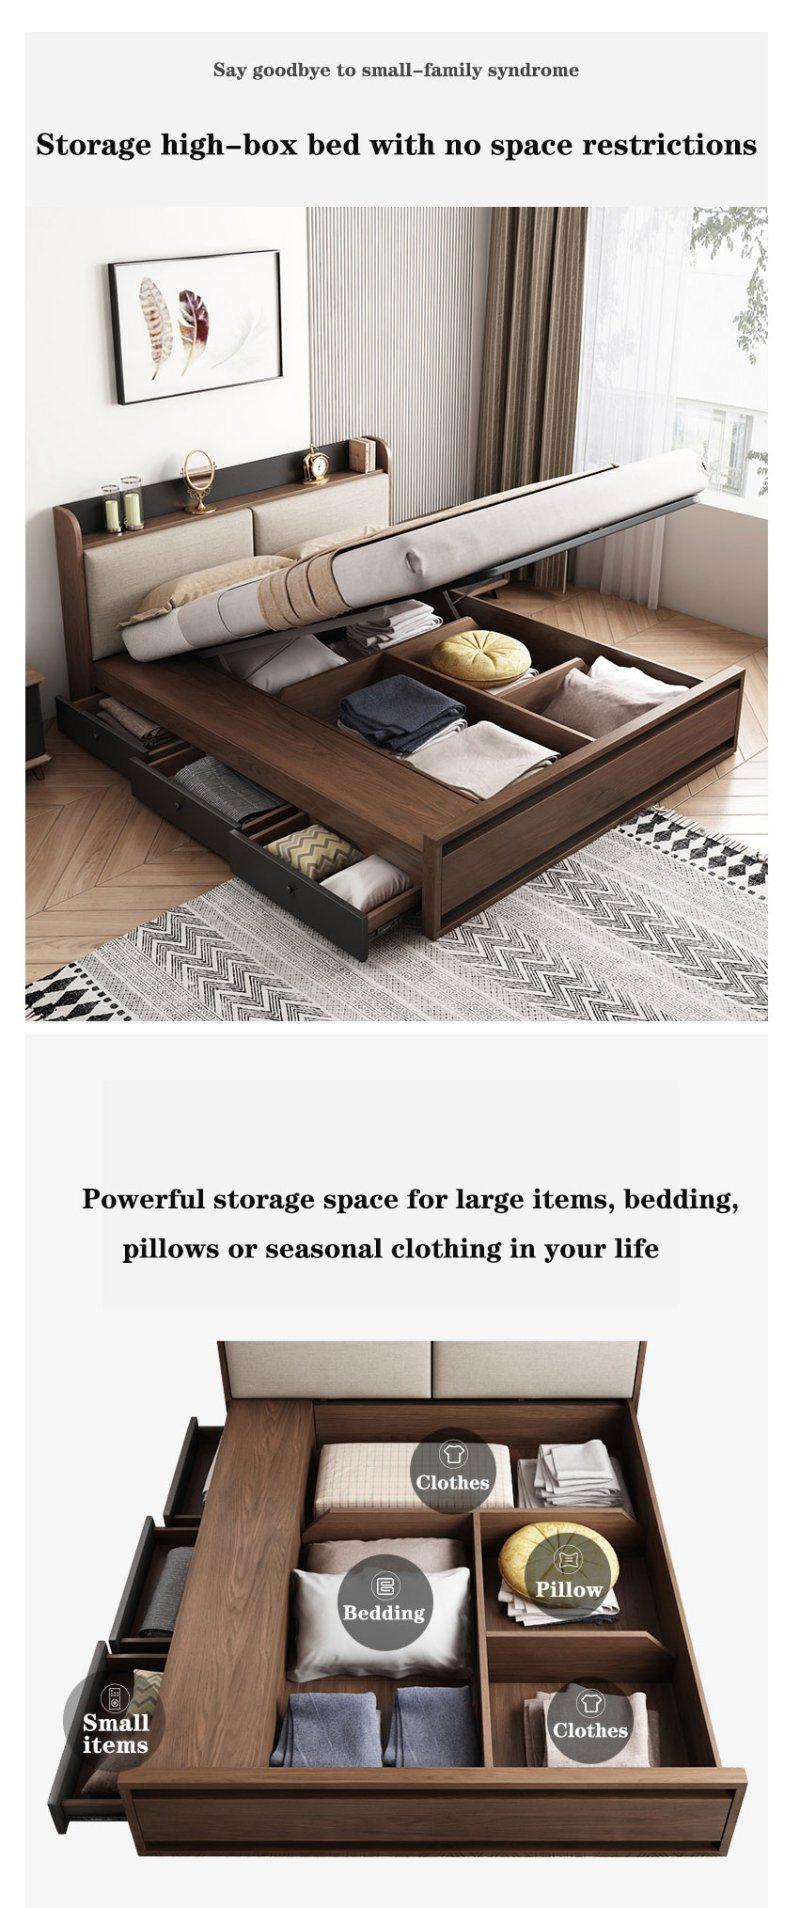 Latest Style Wooden Modern China Factory Wholesale Bedroom Export Package Non-Washable Customized High Quality Massage Double Bed